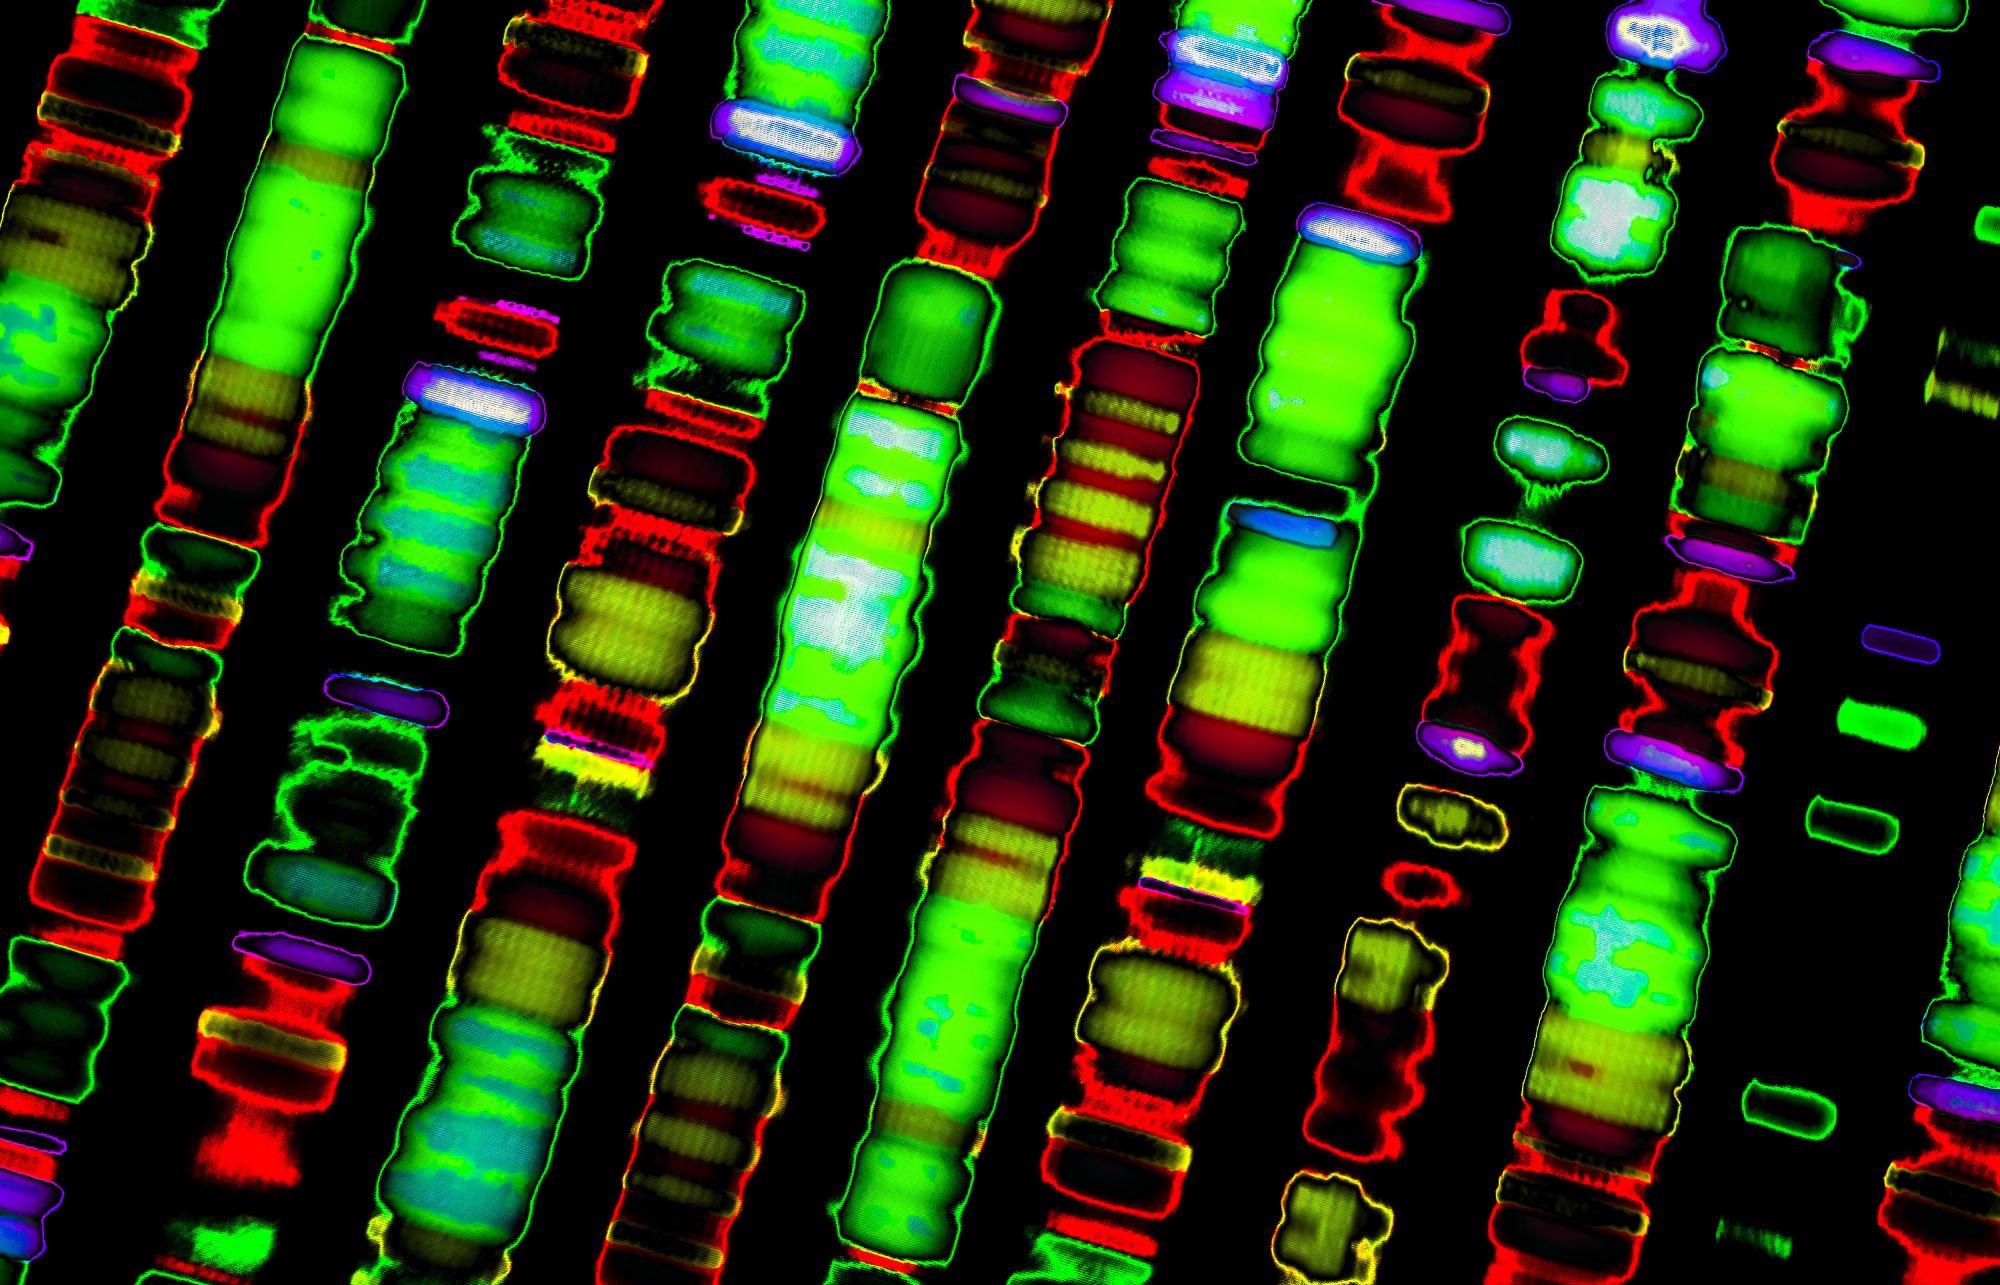 The complete sequence of a human genome. Image Credit: Gio.tto / Shutterstock